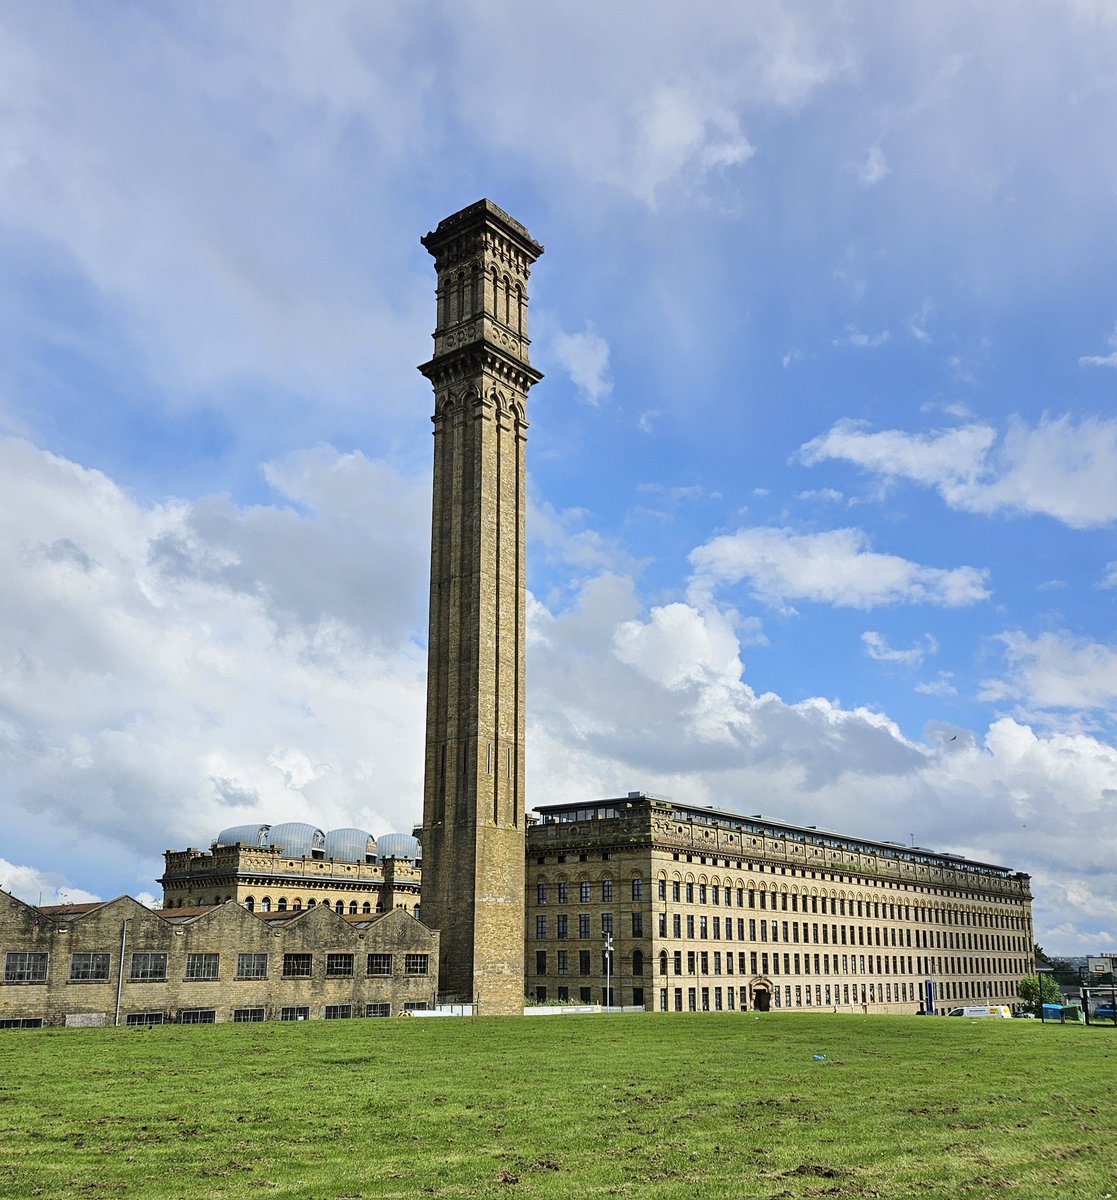 Lister's Mills, Manningham, Bradford. It was the largest silk factory in the world.